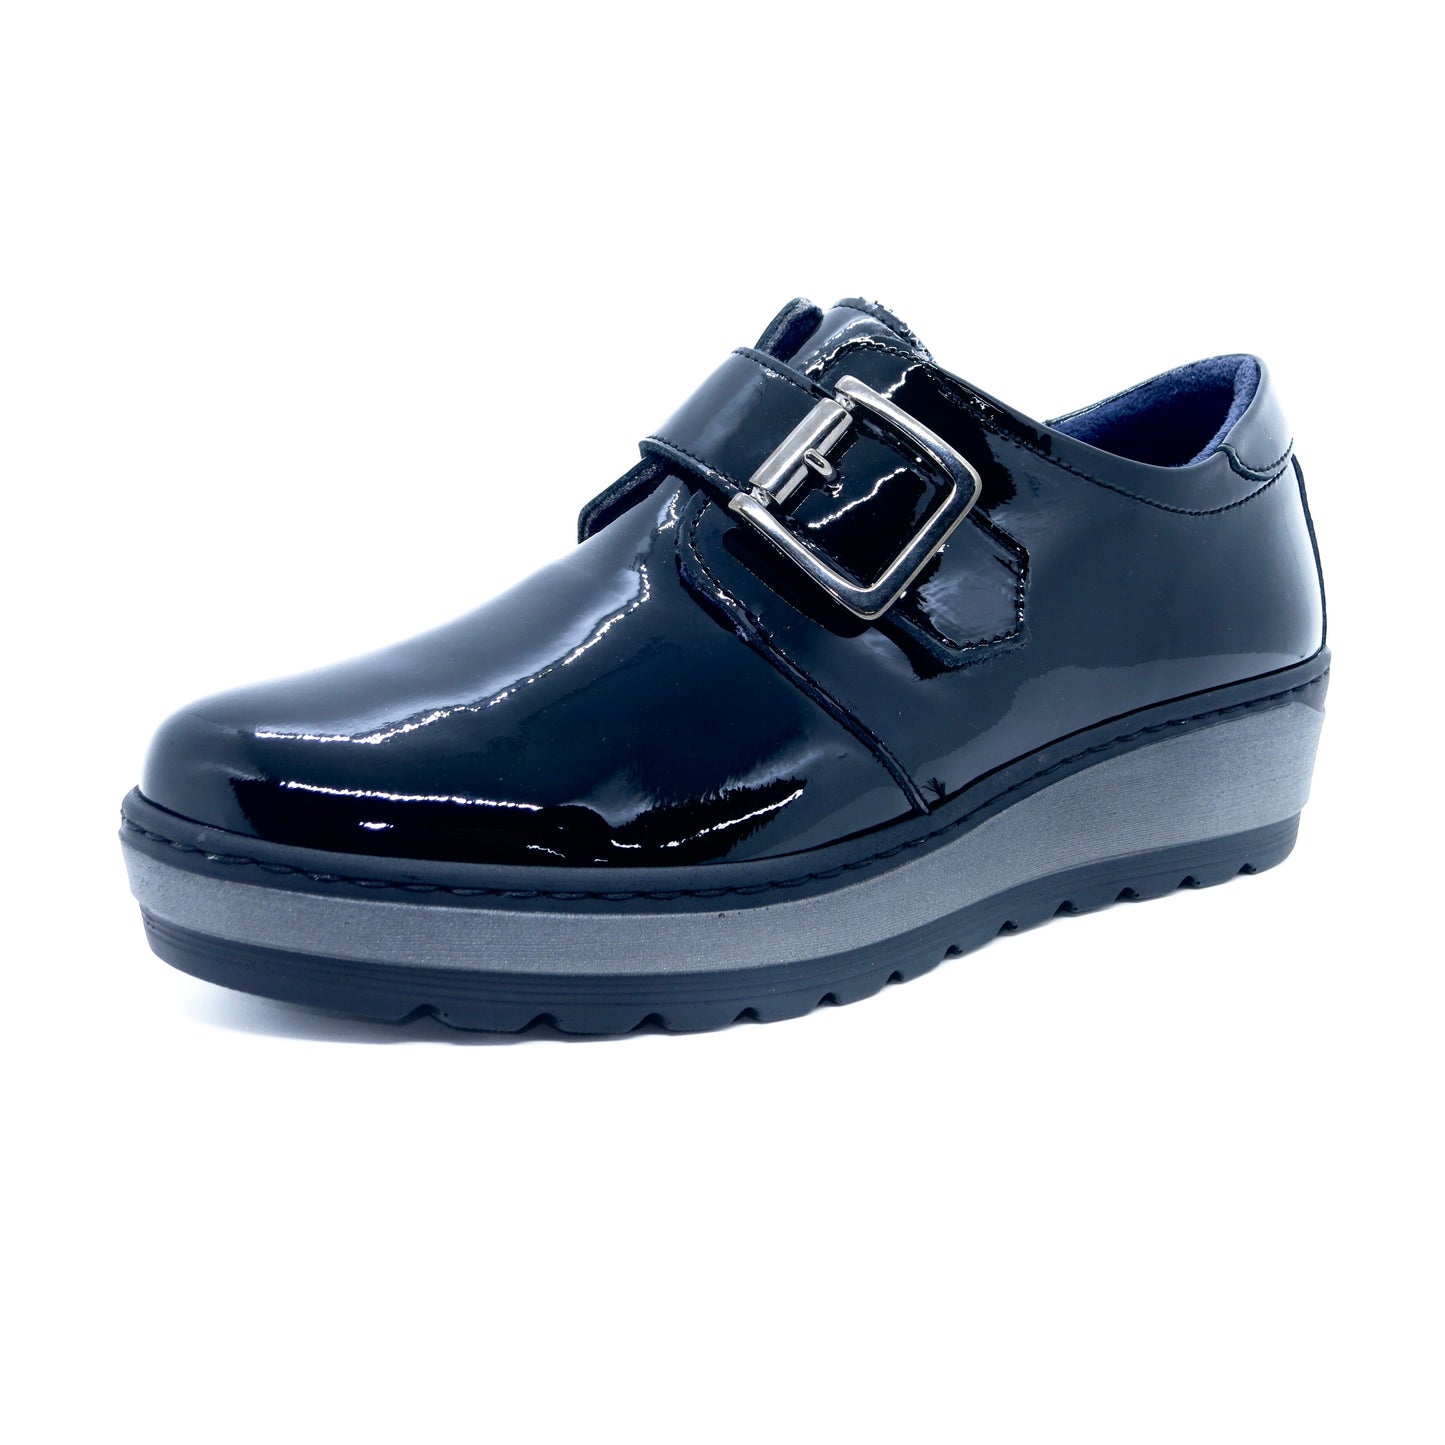 Notton 0451 122 Black Patent Shoes with Buckley